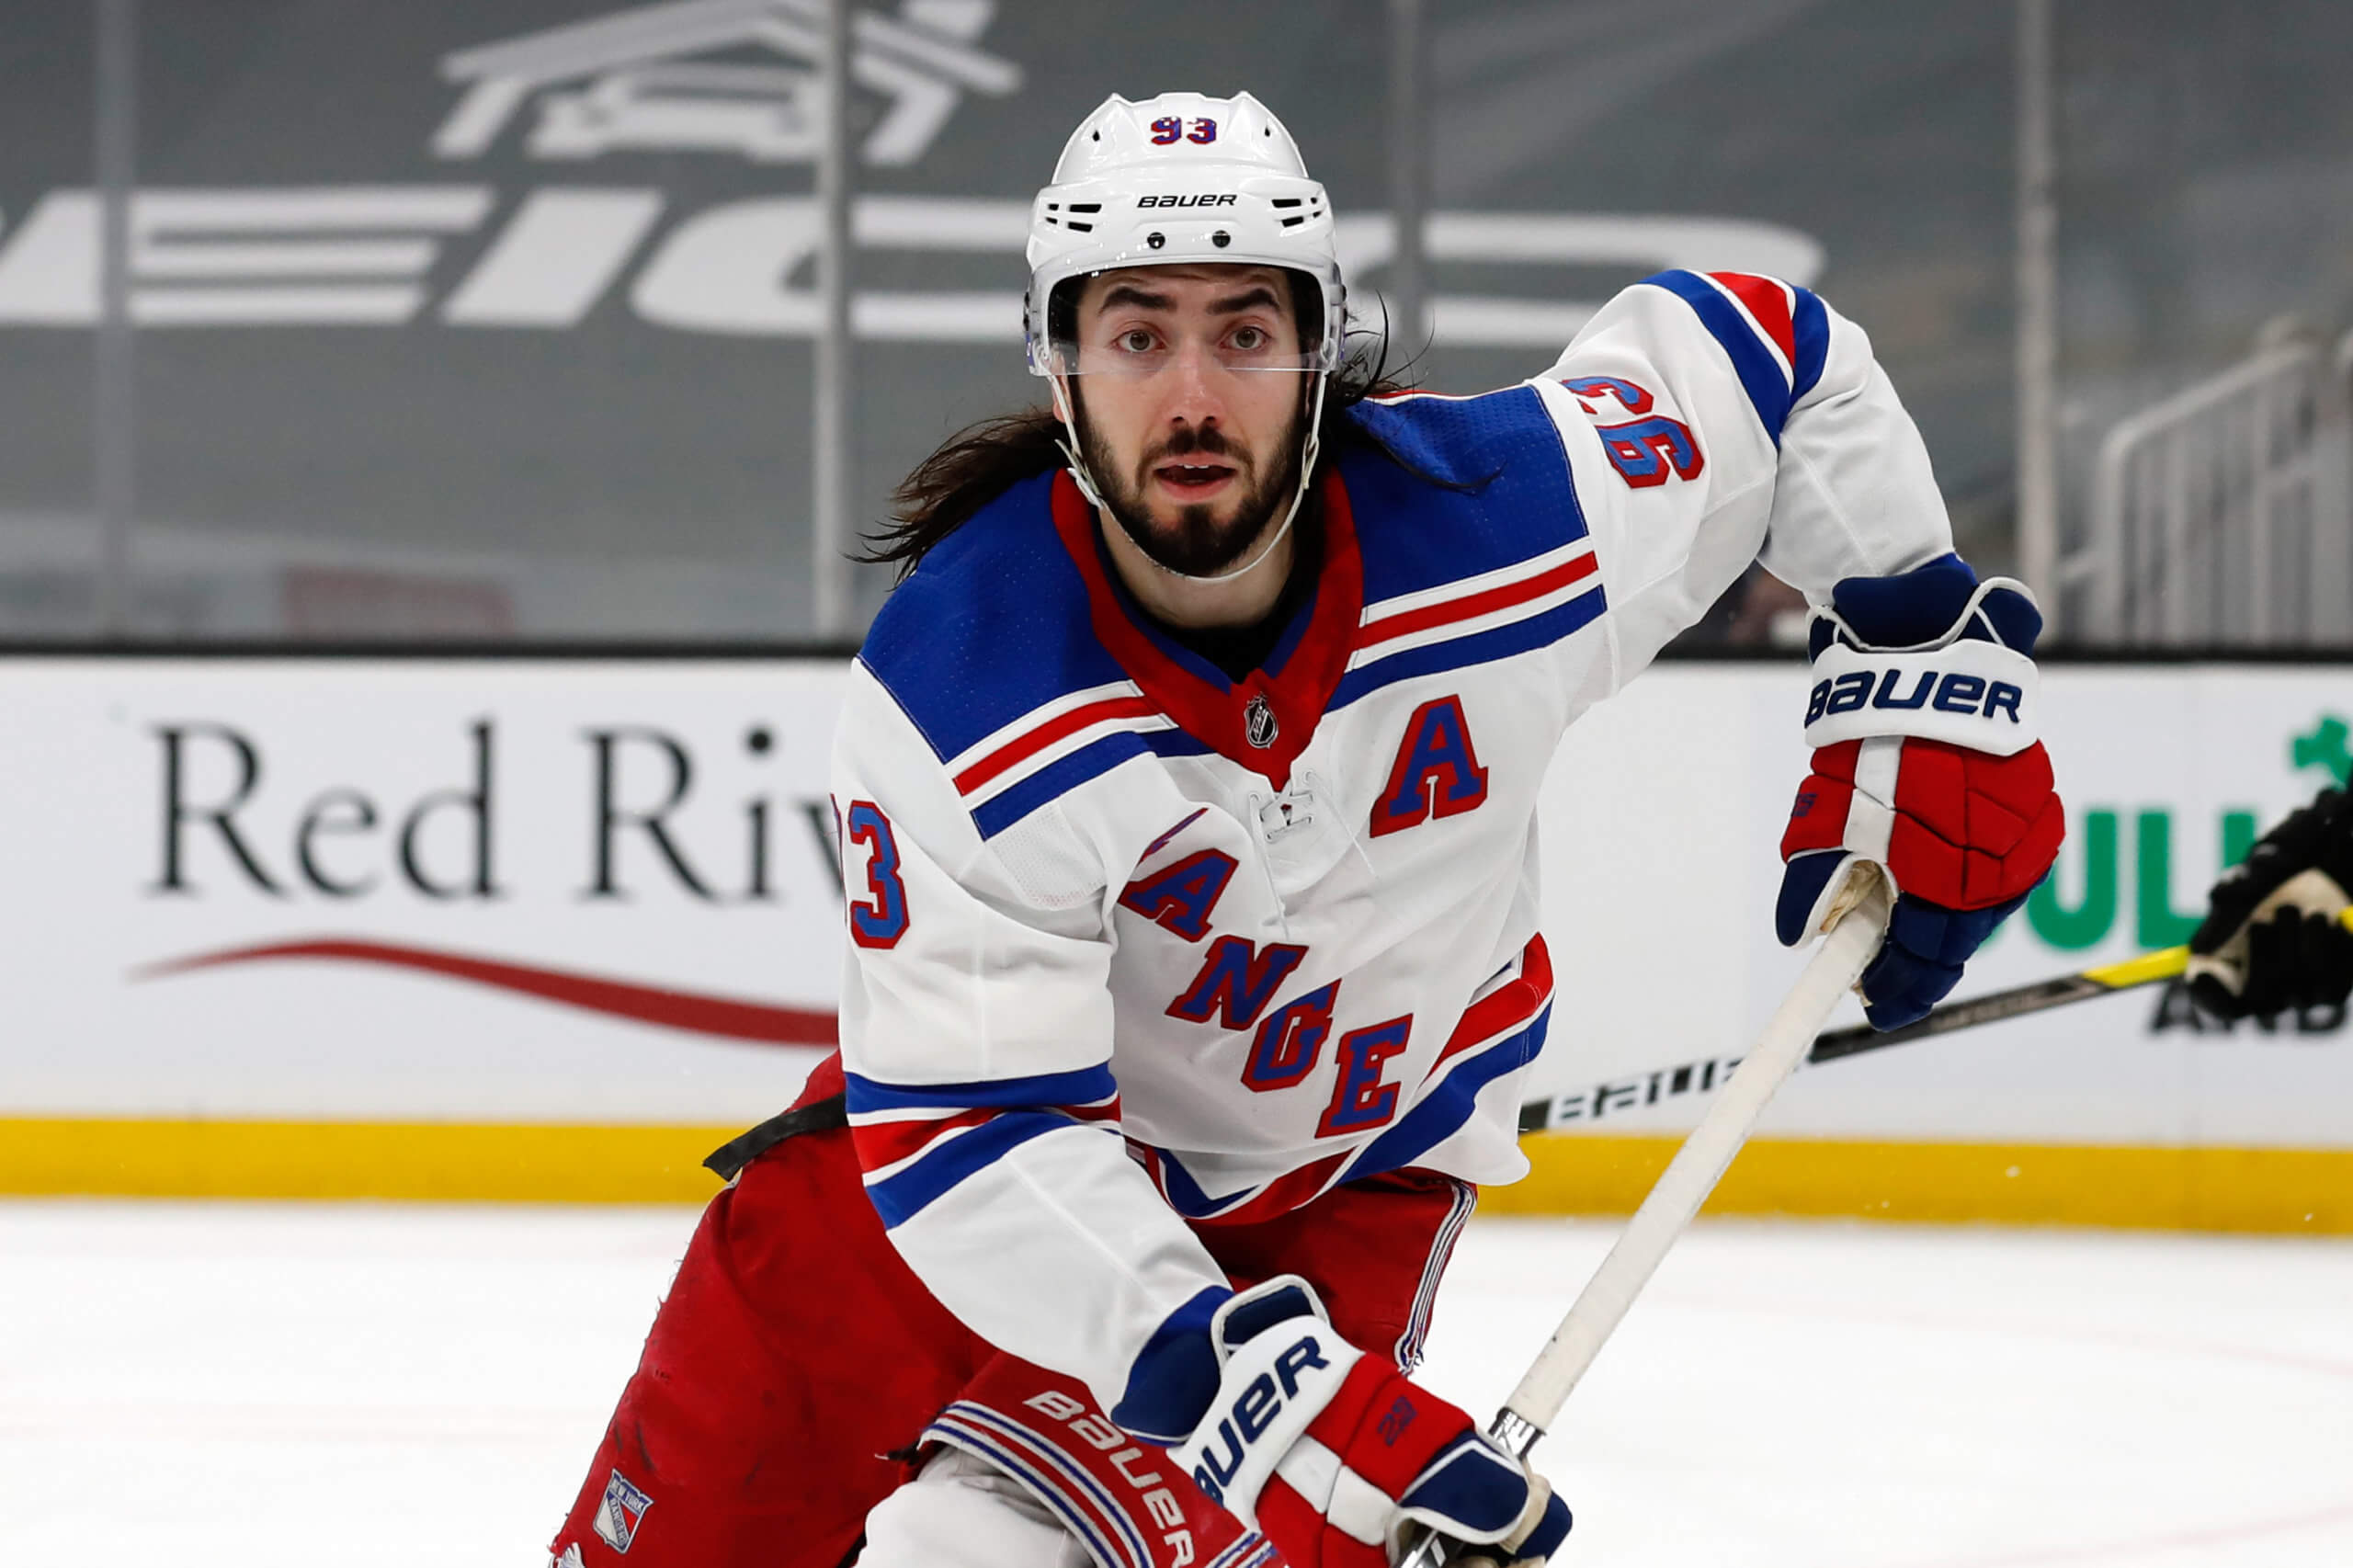 Rangers agree to terms with Mika Zibanejad on 8 year extension